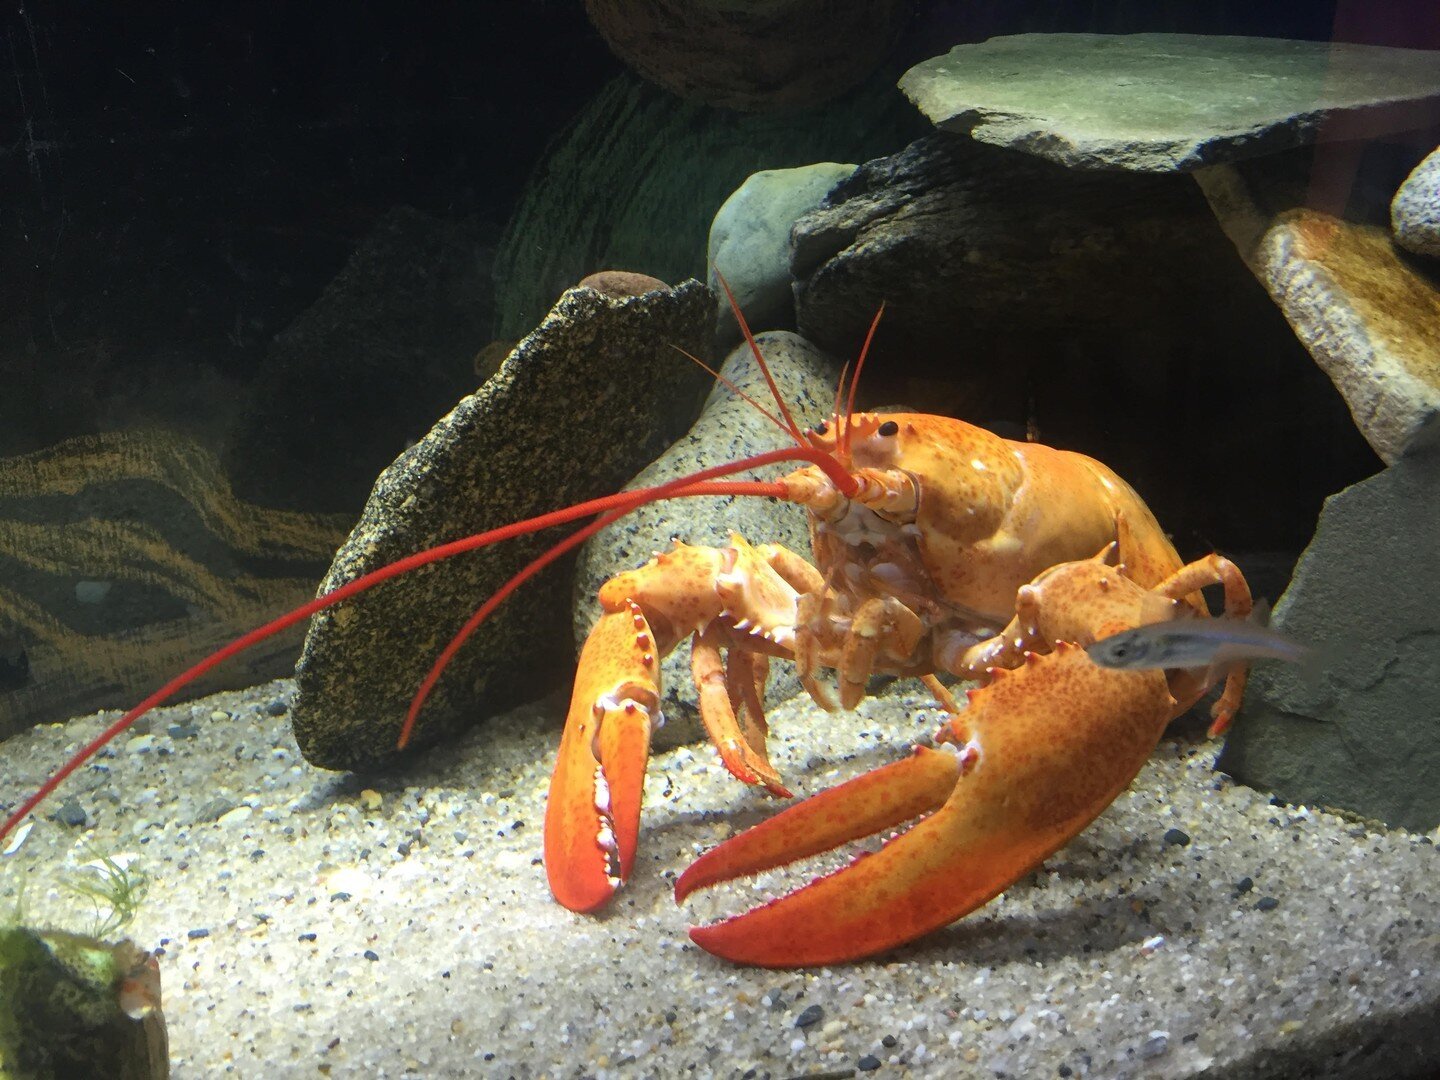 AQUARIUM ANTICS

For 600 Points in our ACKlimate Scavenger Hunt, visit the Maria Mitchell Association Aquarium! Name and upload a photo of your favorite species to Goosechase Game Code D77LBV.

Clementine the Lobster is a personal favorite | image co